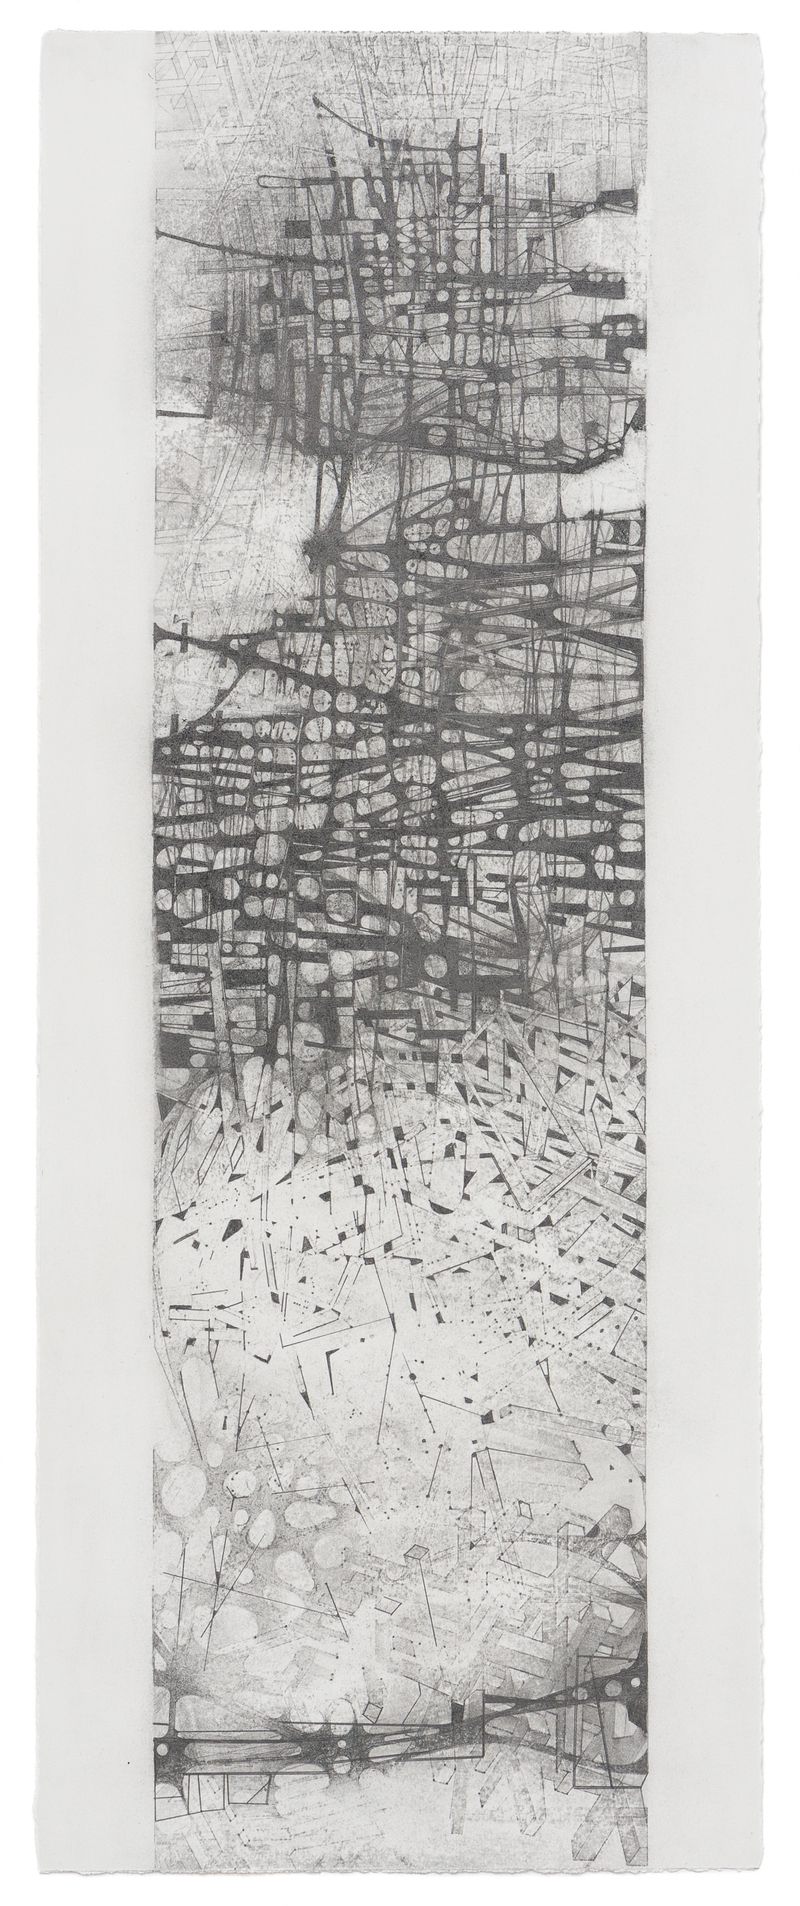 A graphite and ink on paper drawing titled Urban Plateau by Stephen Talasnik.